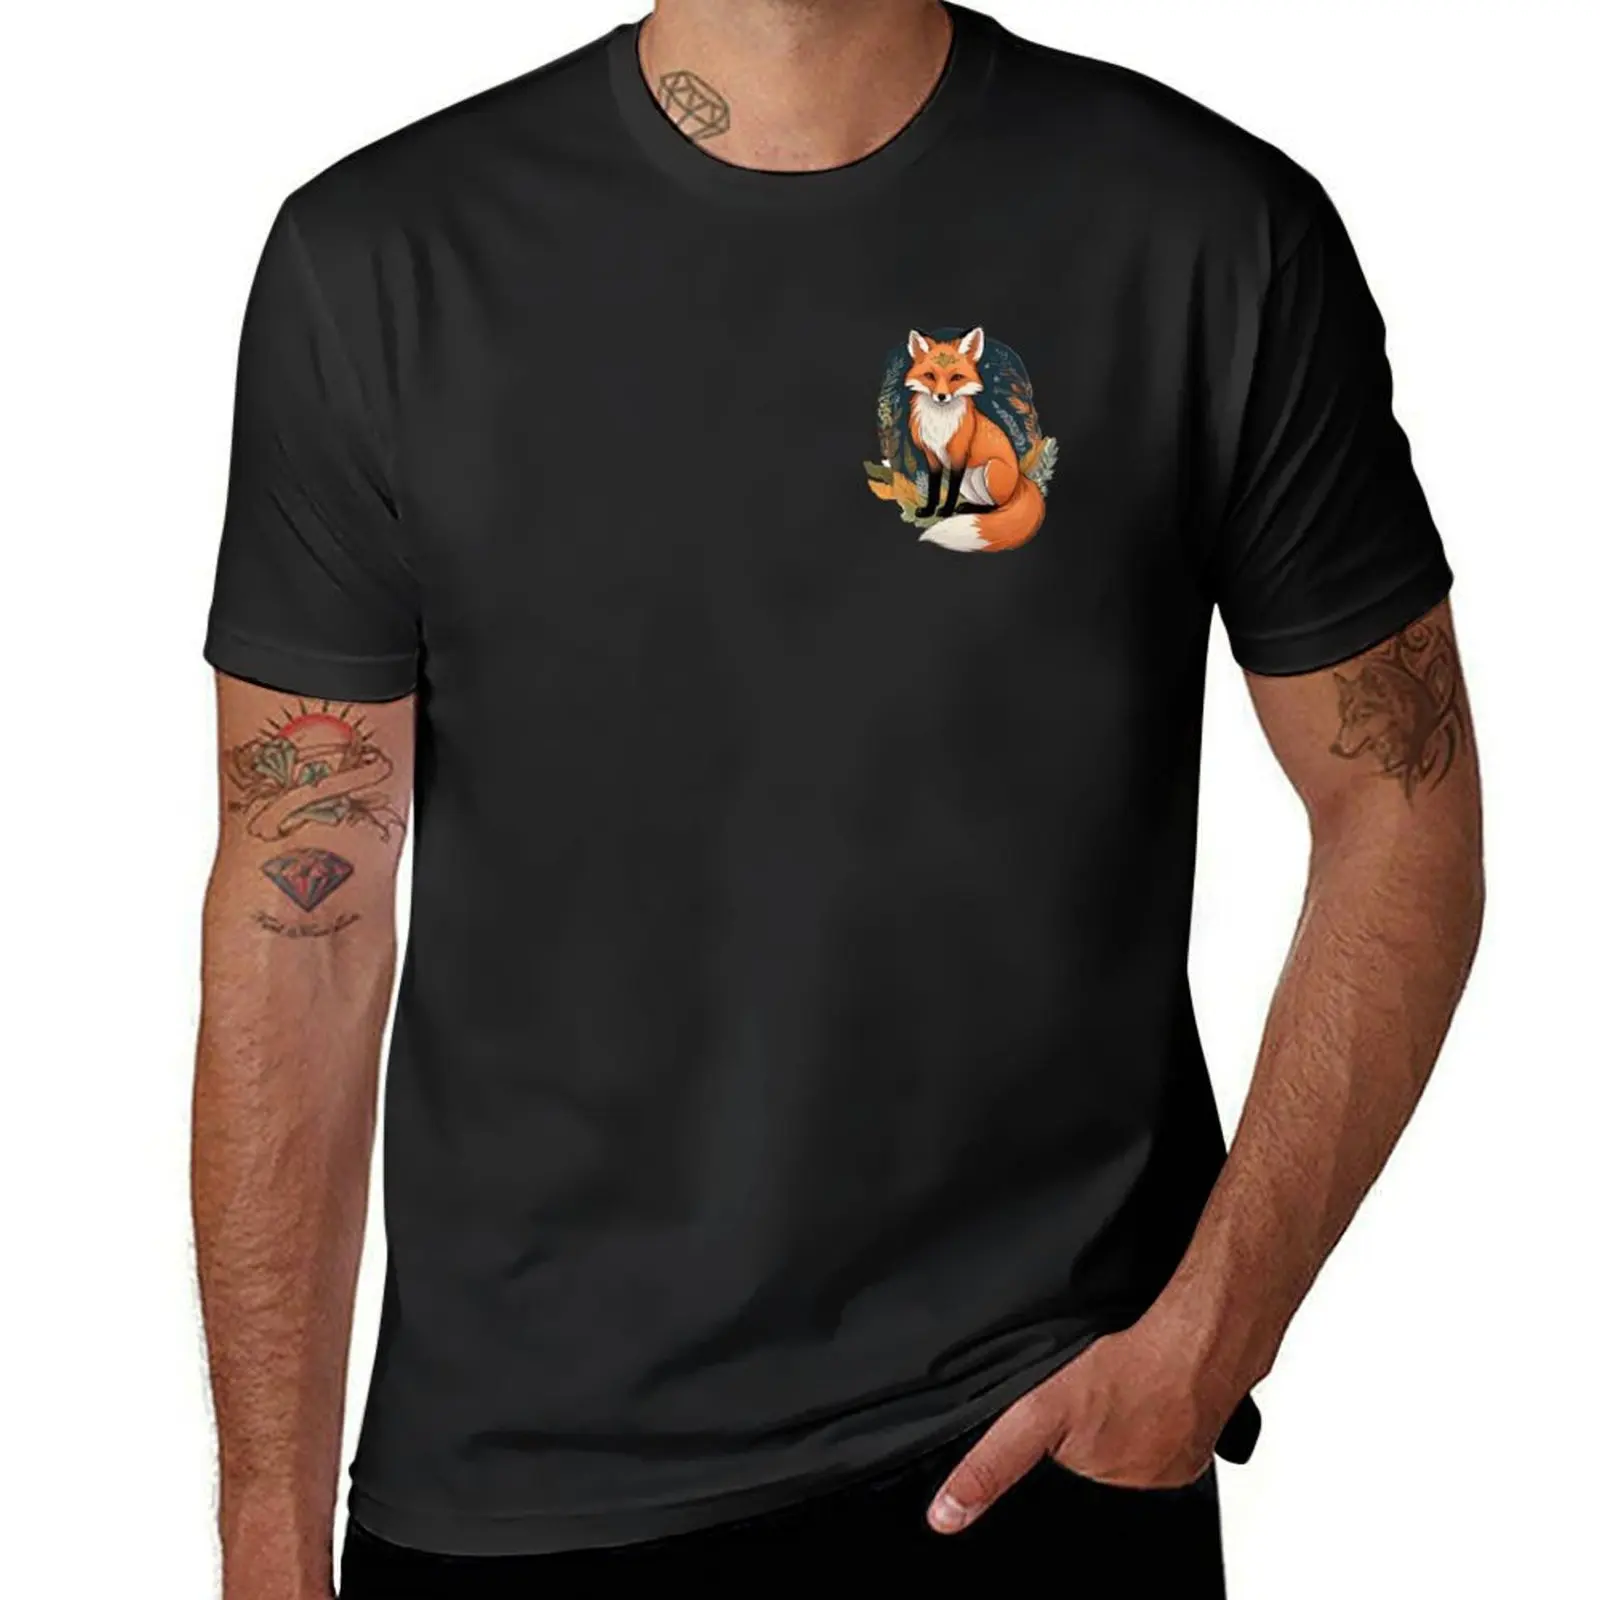 

Majestic Forest Fox Decal T-Shirt anime animal prinfor boys Short sleeve tee t shirts for men cotton